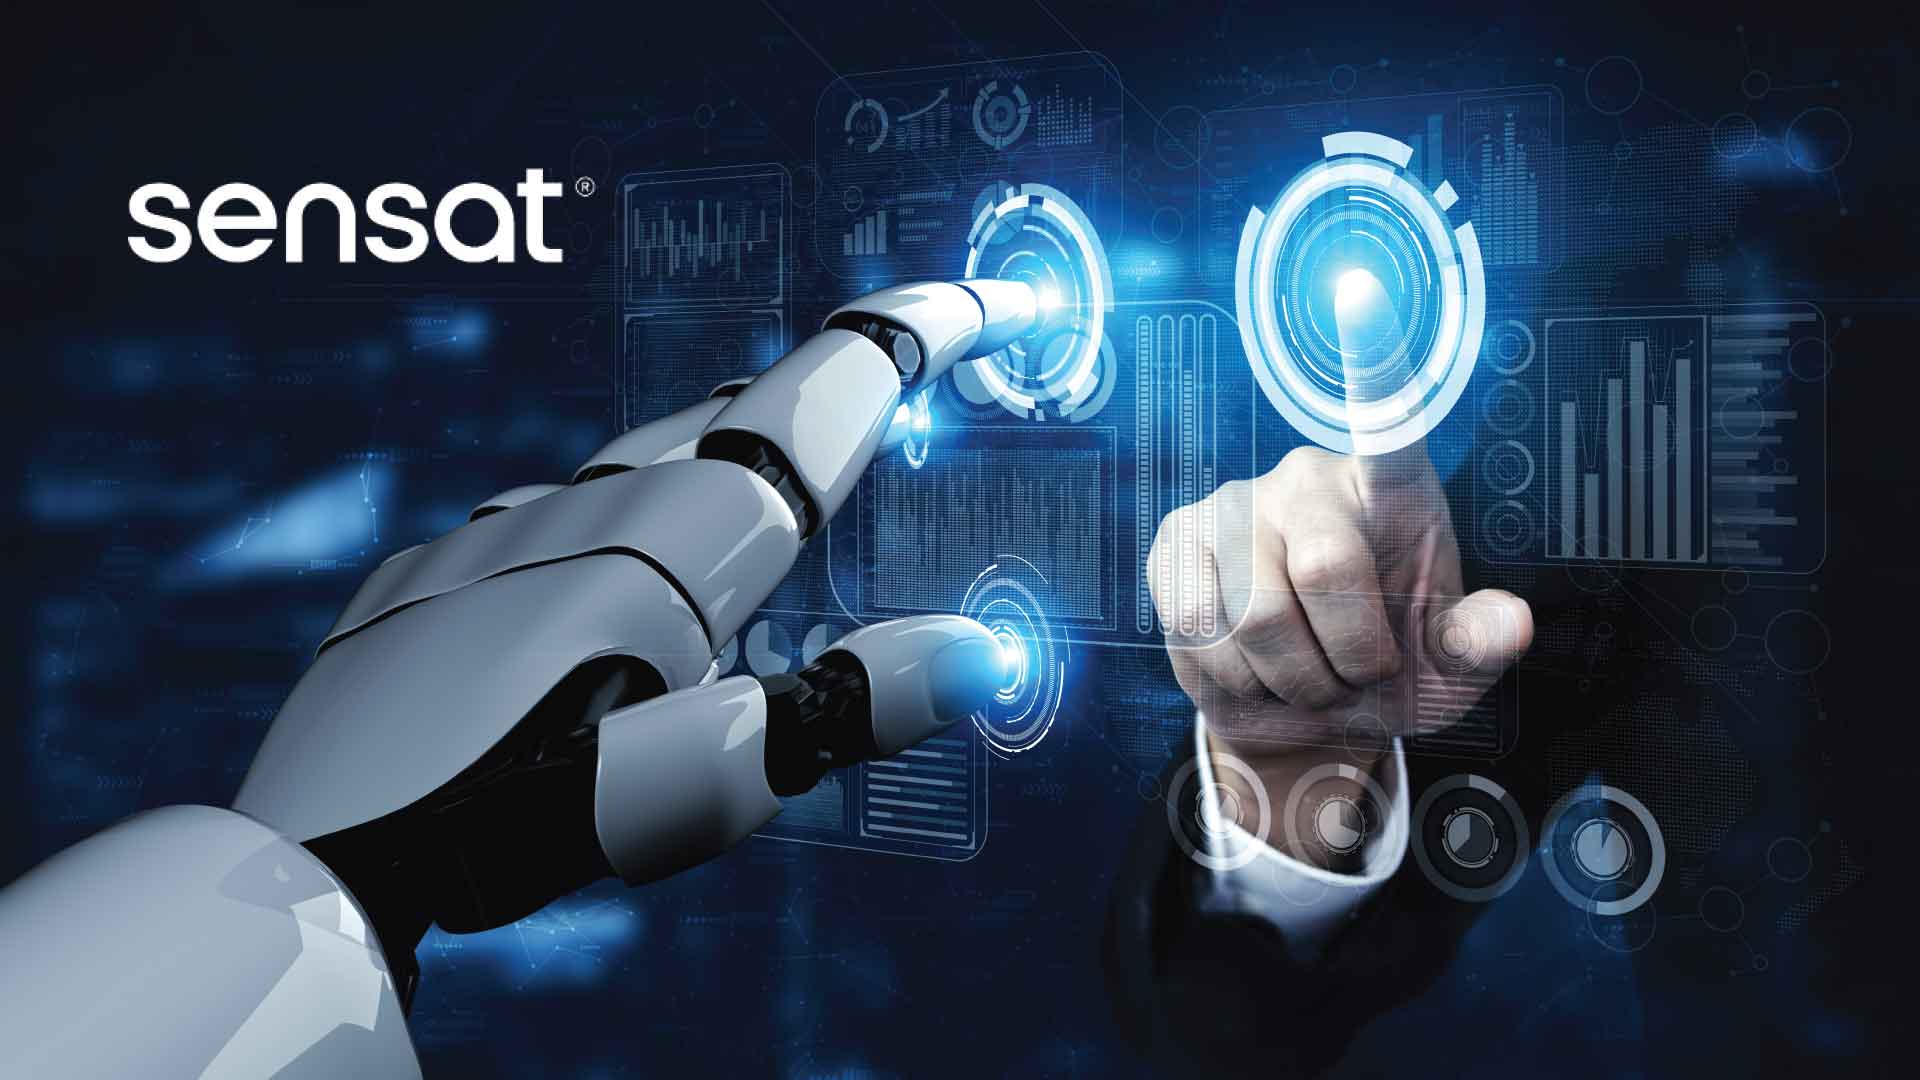 Digital Twin Software Company Sensat Raises $20.5m USD to Automate the Way Infrastructure is Planned, Built and Managed